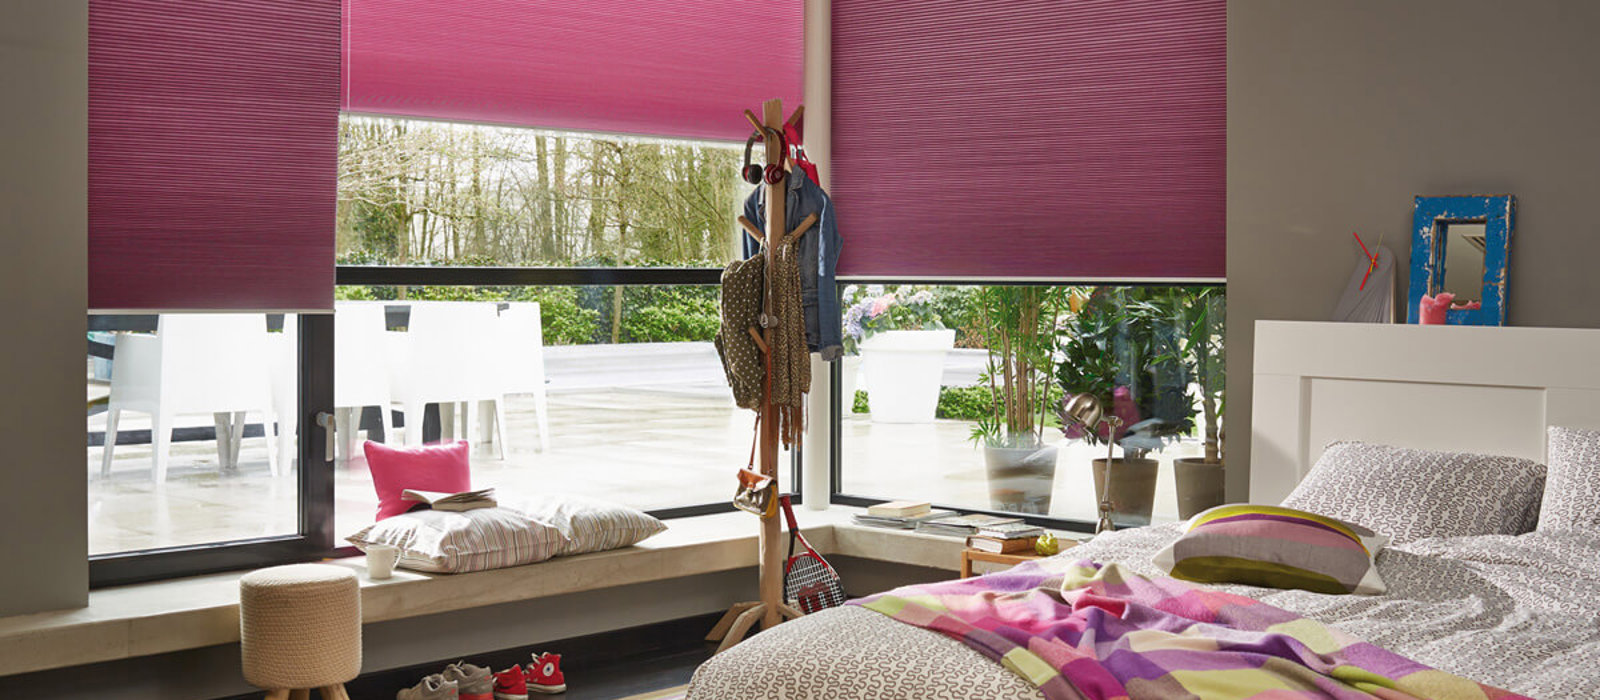 Colourful child's bedroom with hot pink Duette energy-saving blinds